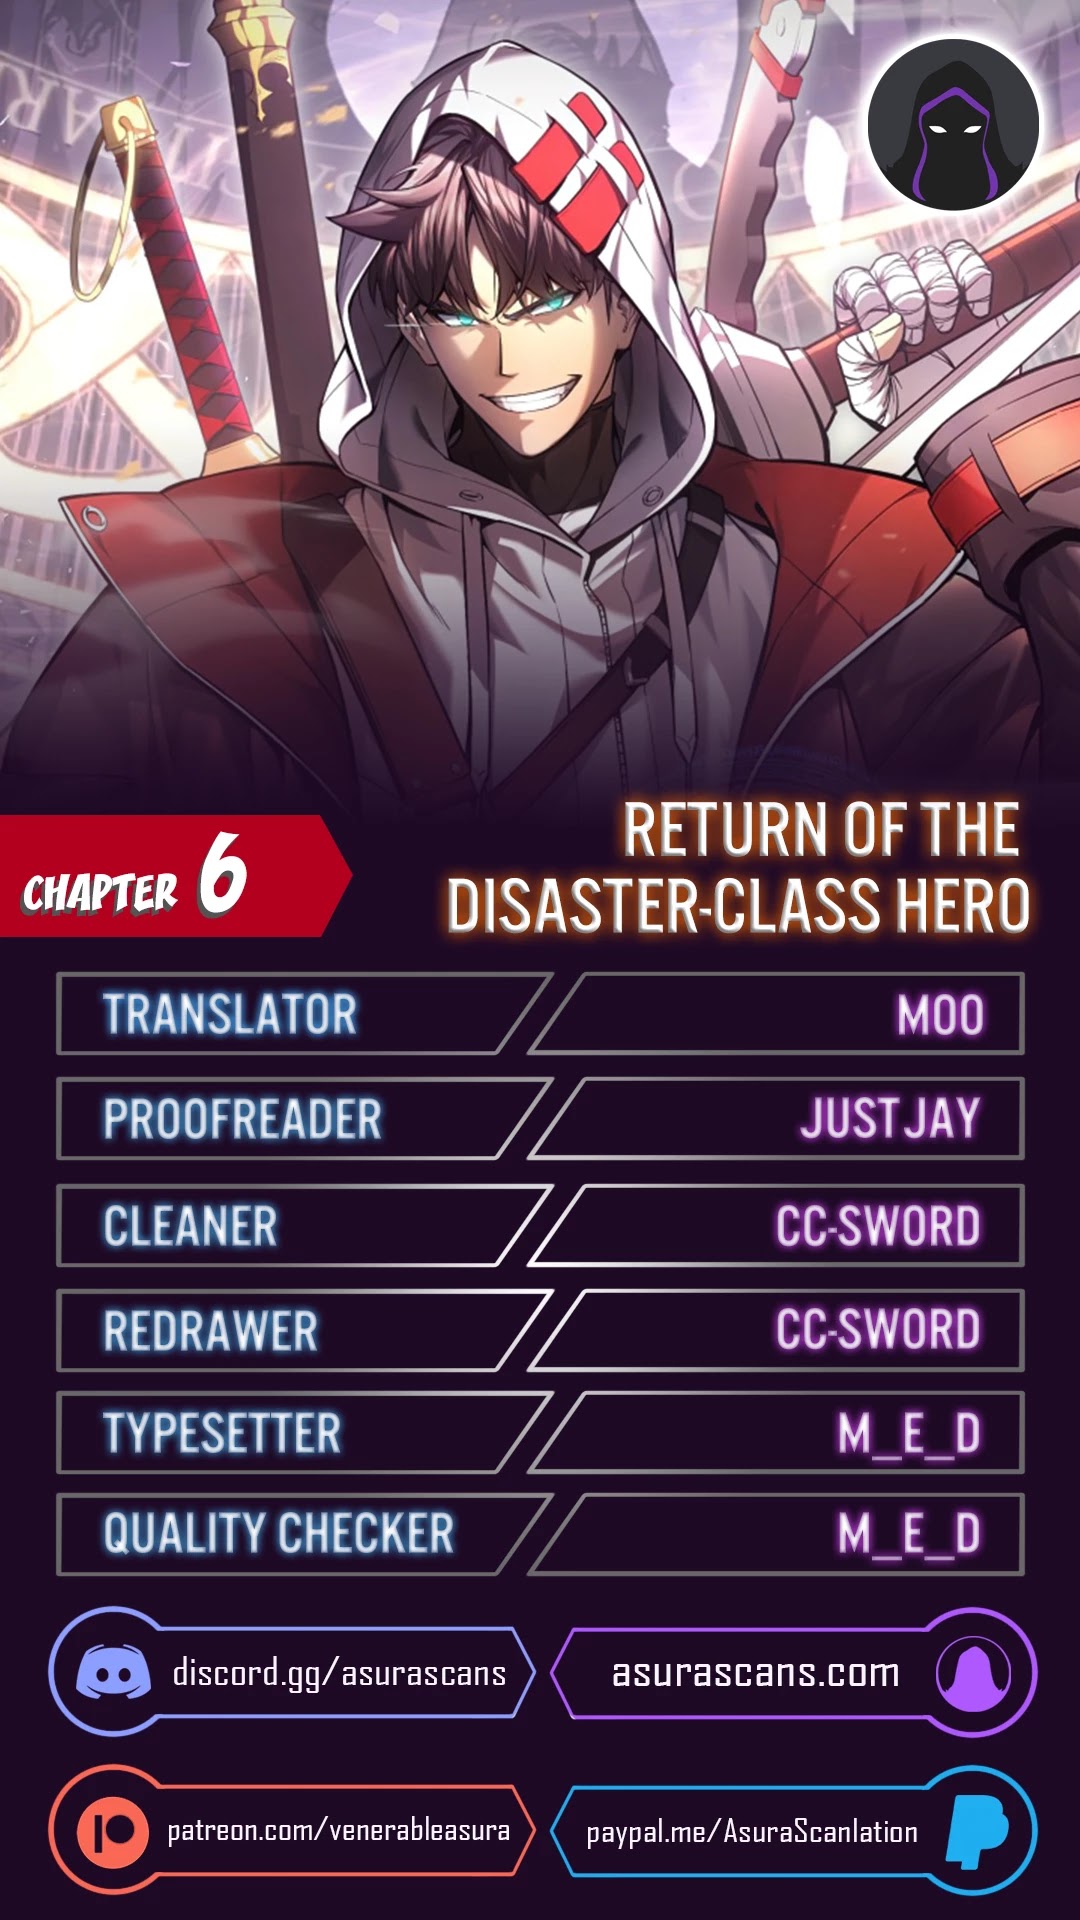 The Return Of The Disaster-Class Hero Chapter 6